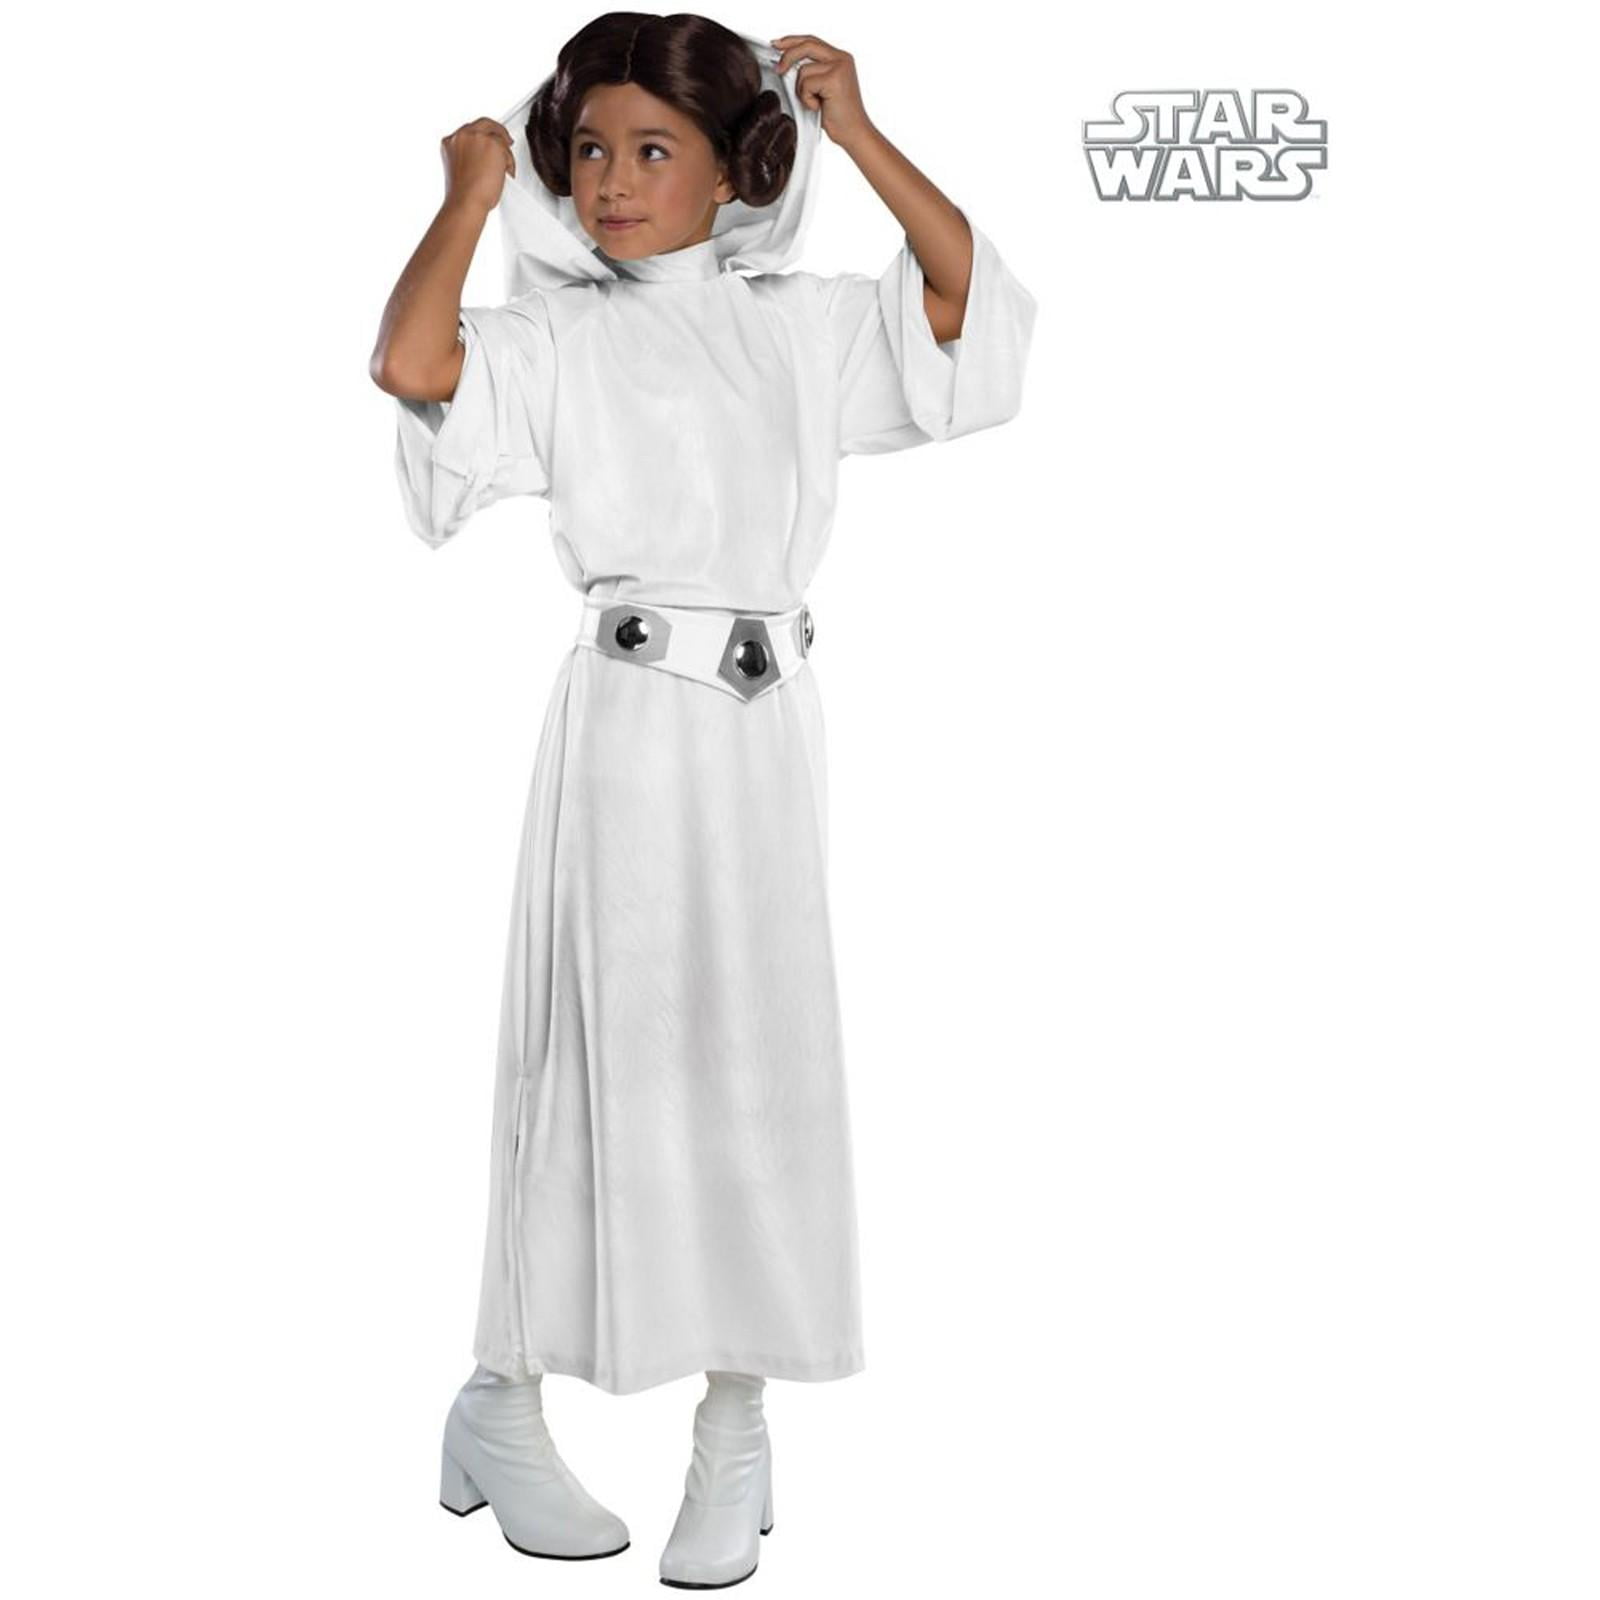 Star Wars Forces of Destiny Deluxe Princess Leia Organa Hoth Child Costume 